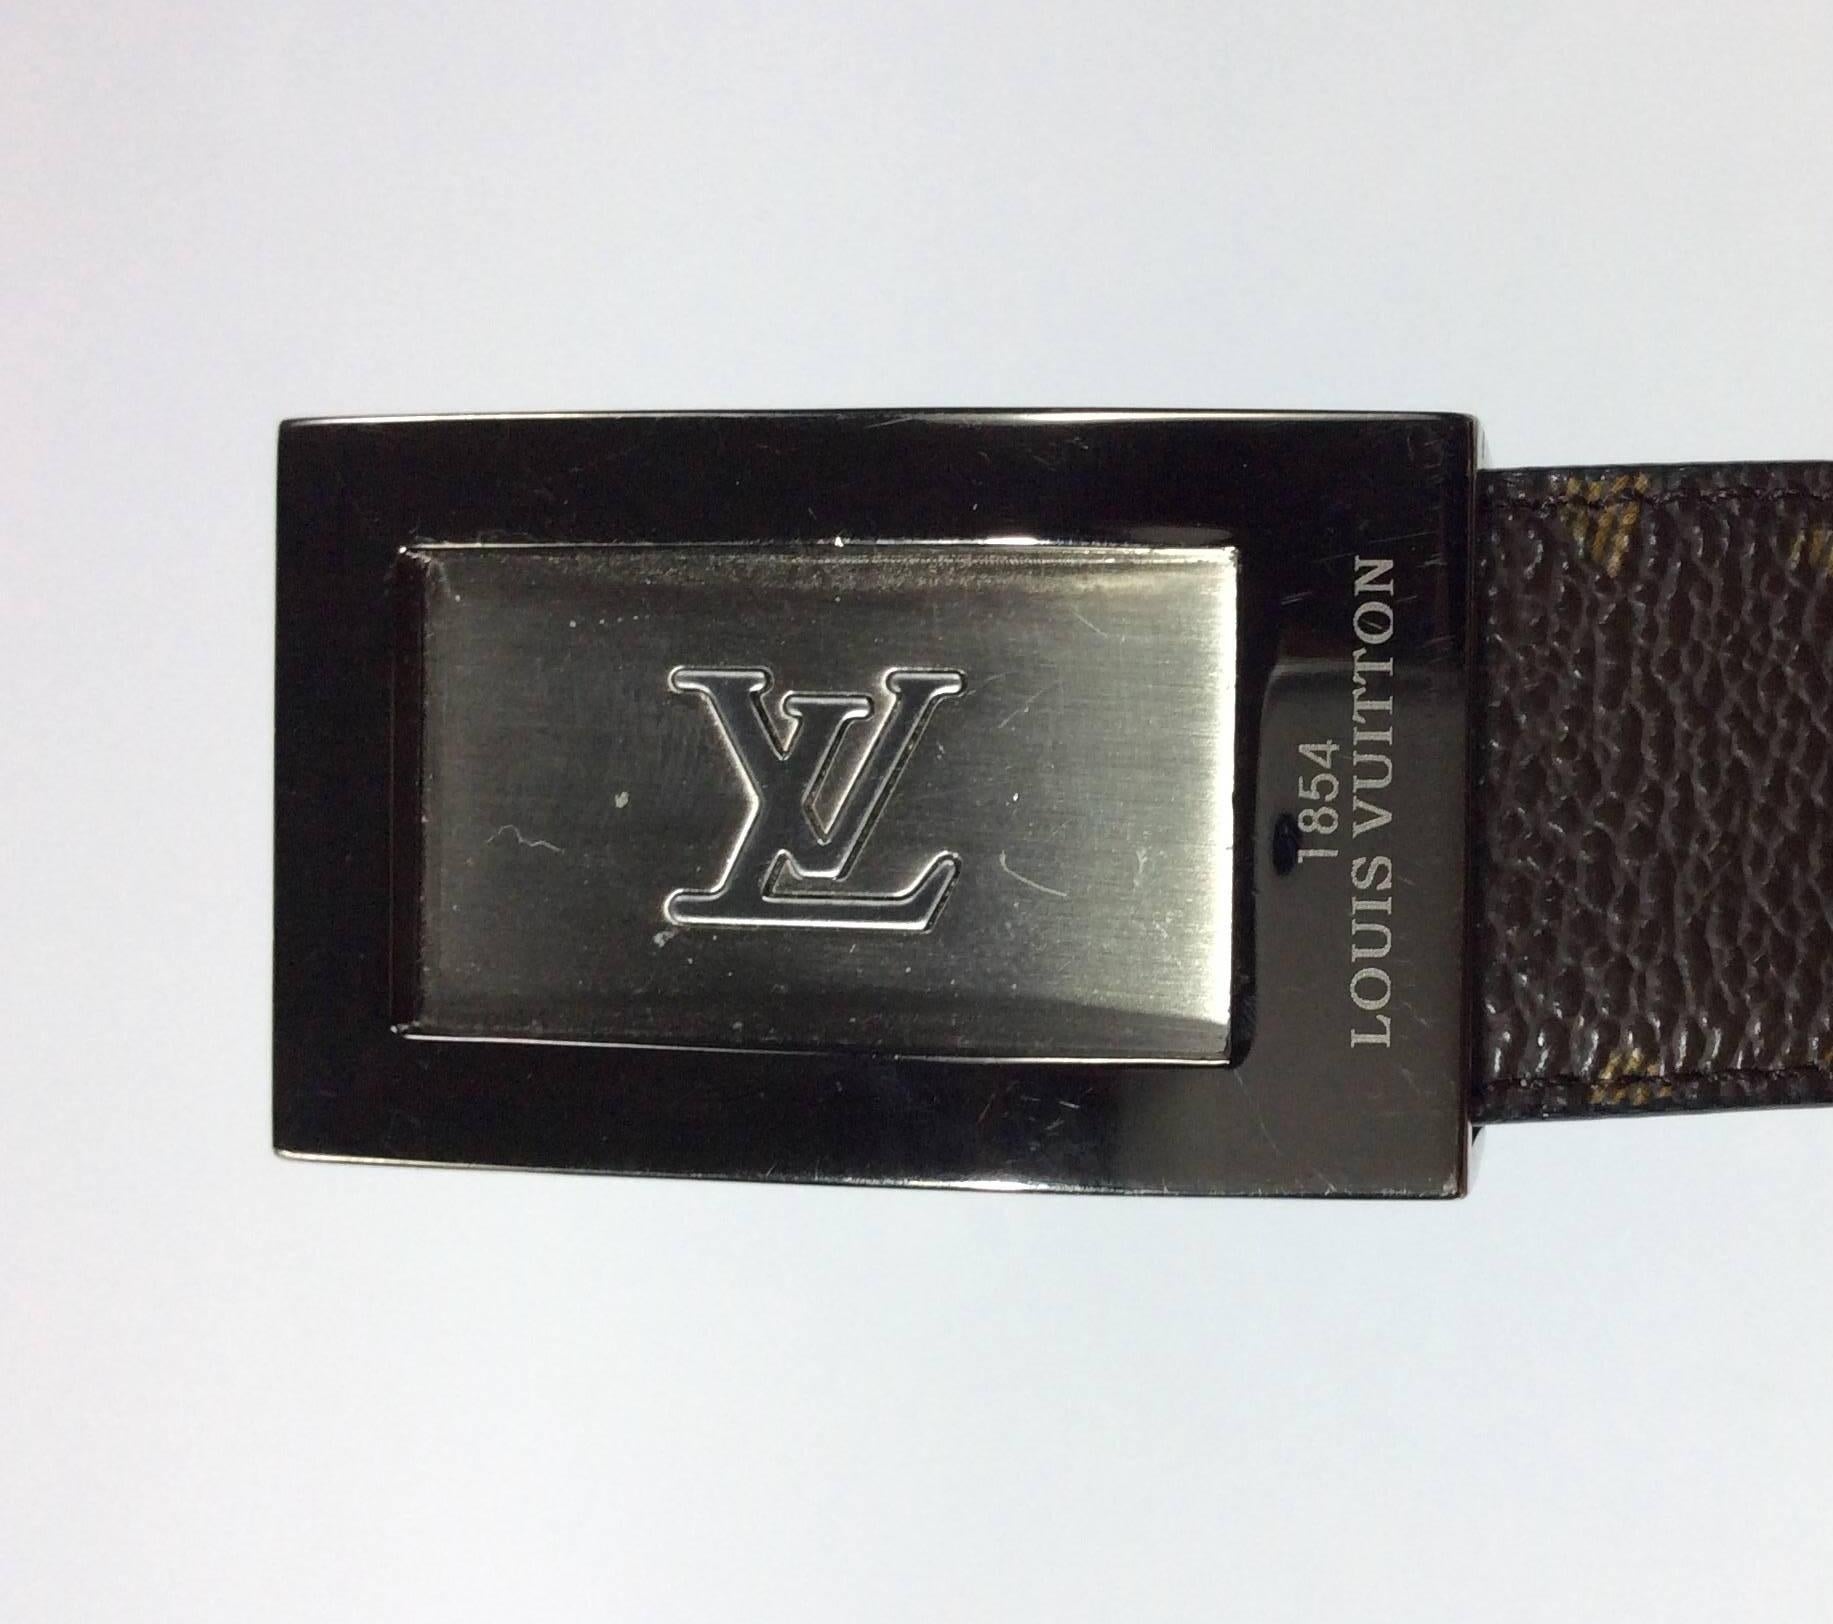 Brown Leather Reversible LV Pattern Belt
31-35 adjustable waist
Band is 1 inch wide
Textured leather with LV pattern
Silver LV logo embossed into buckle
